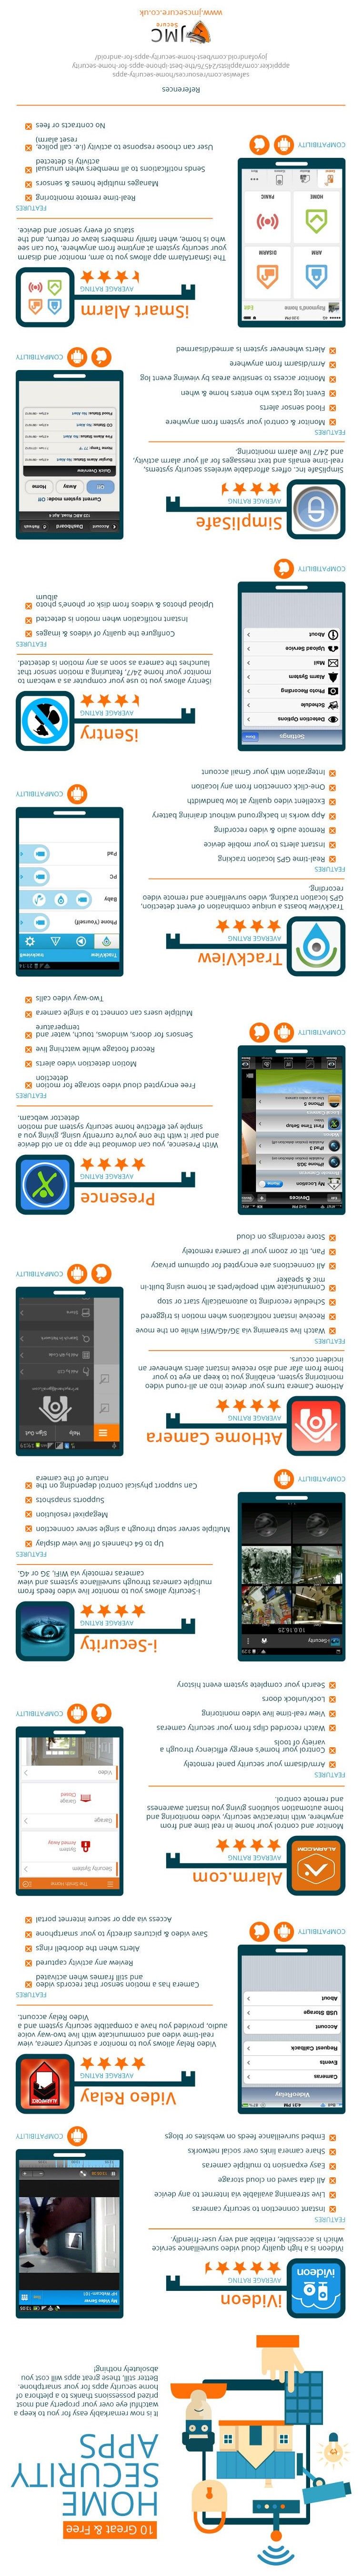 Home security apps infographic